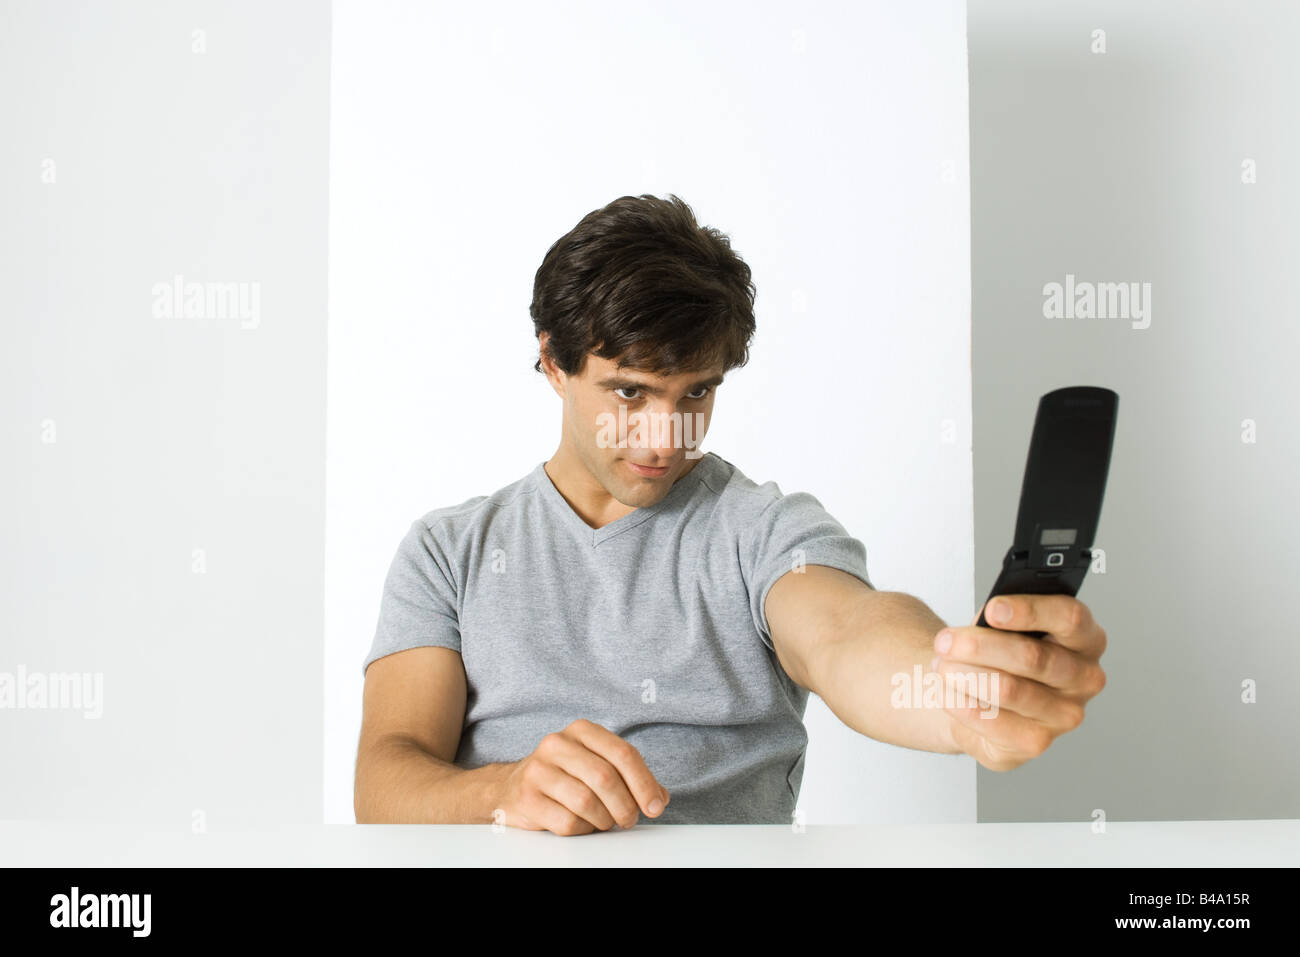 Man photographing self with cell phone Stock Photo